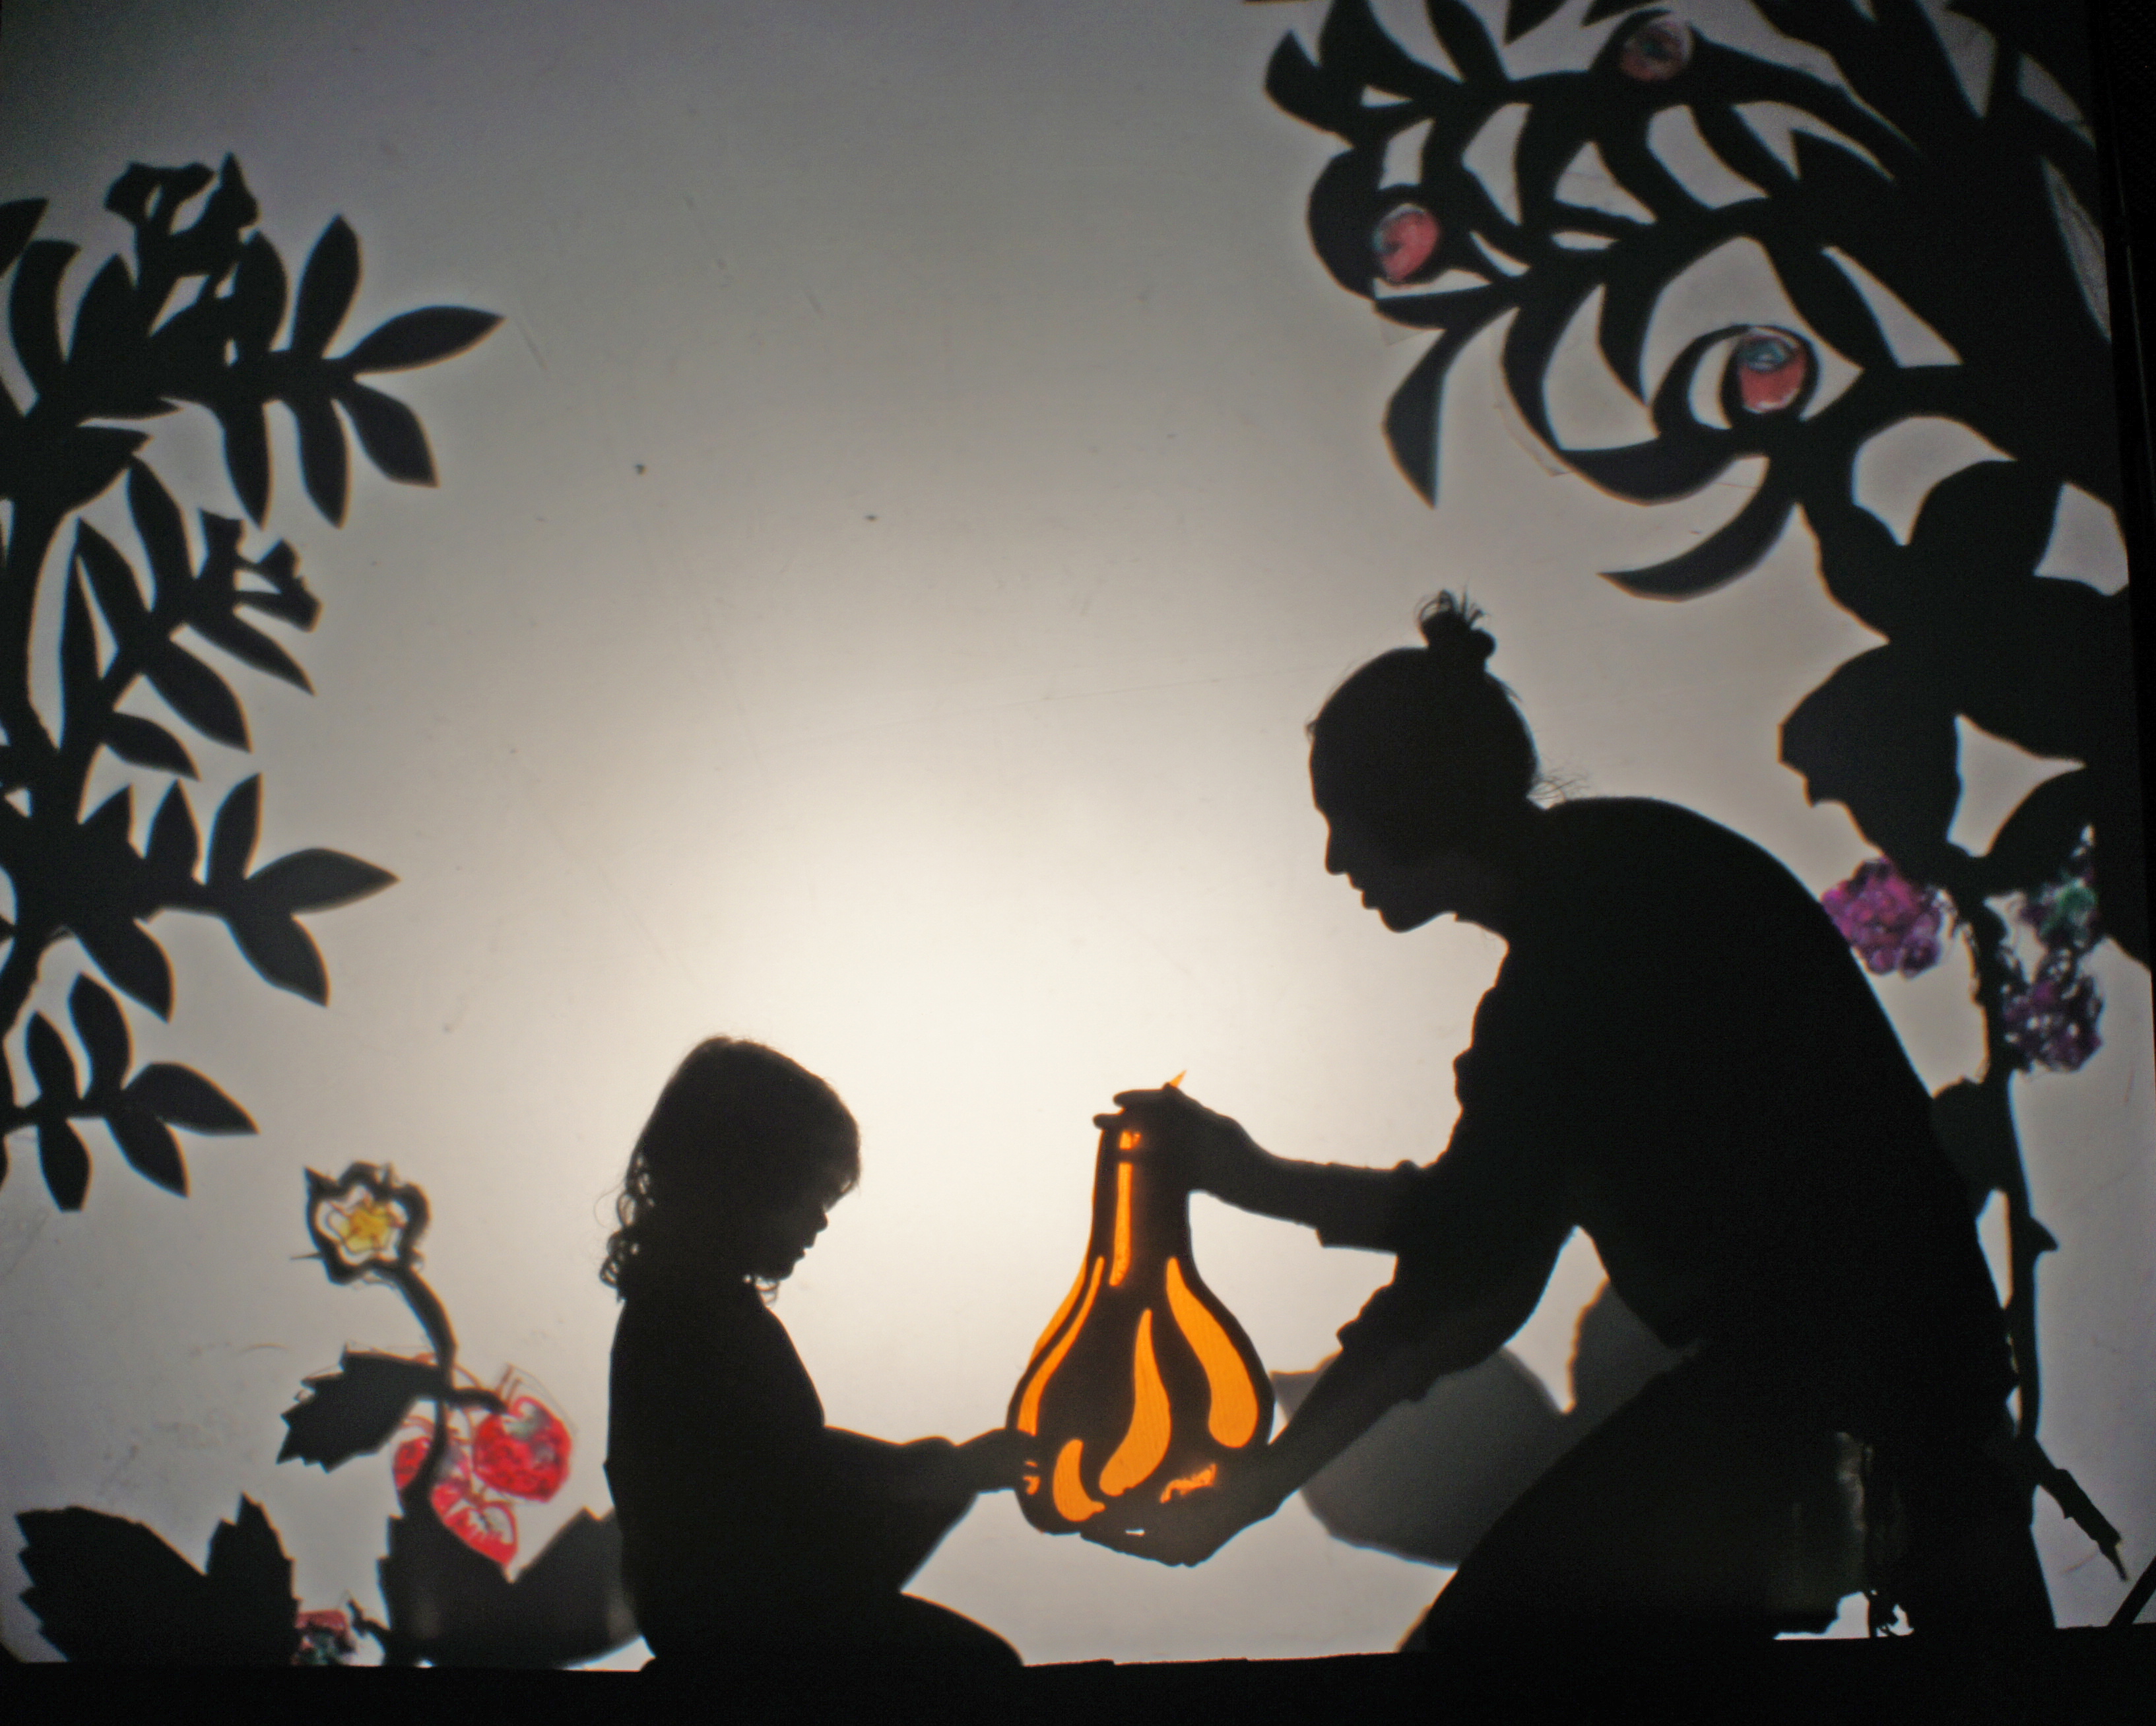 shadow theatre image of parent and child holding a squash in a forest garden